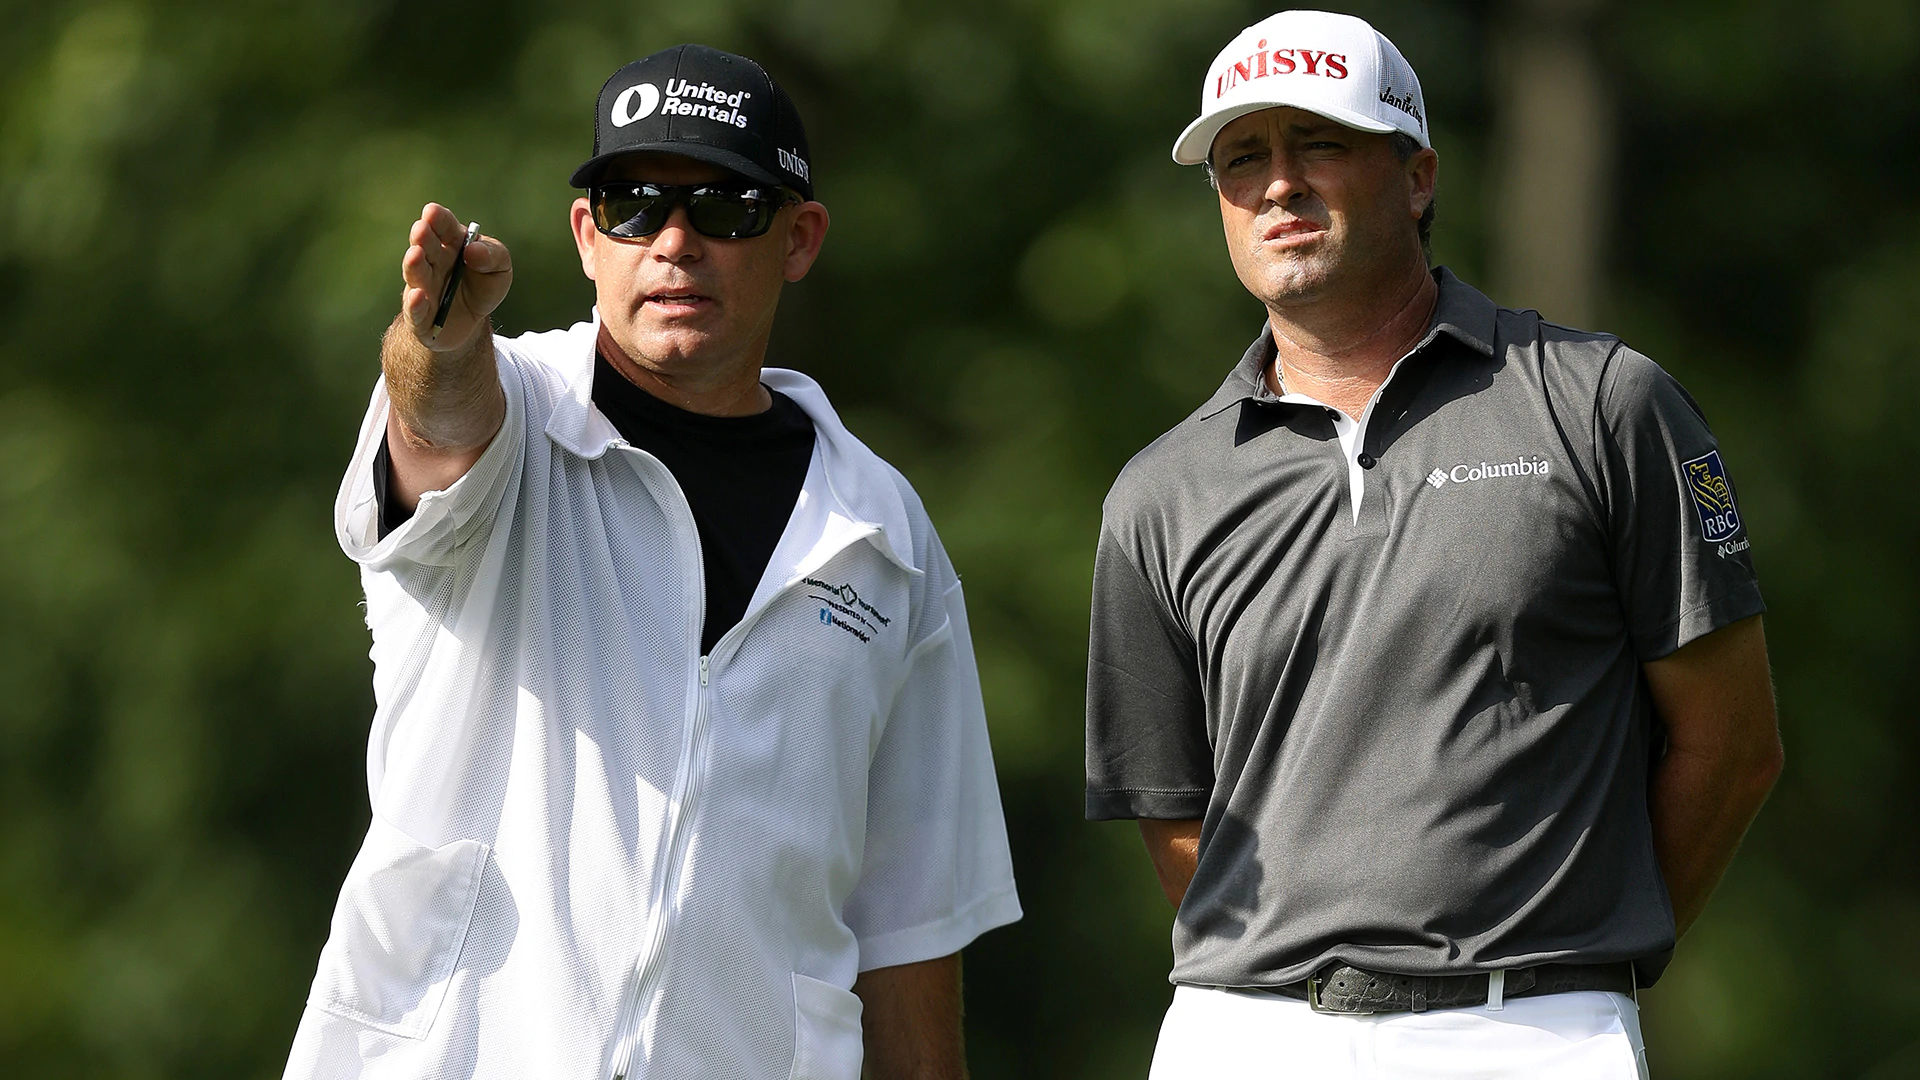 After early exit last week, Ryan Palmer (67) back and contending with old putter